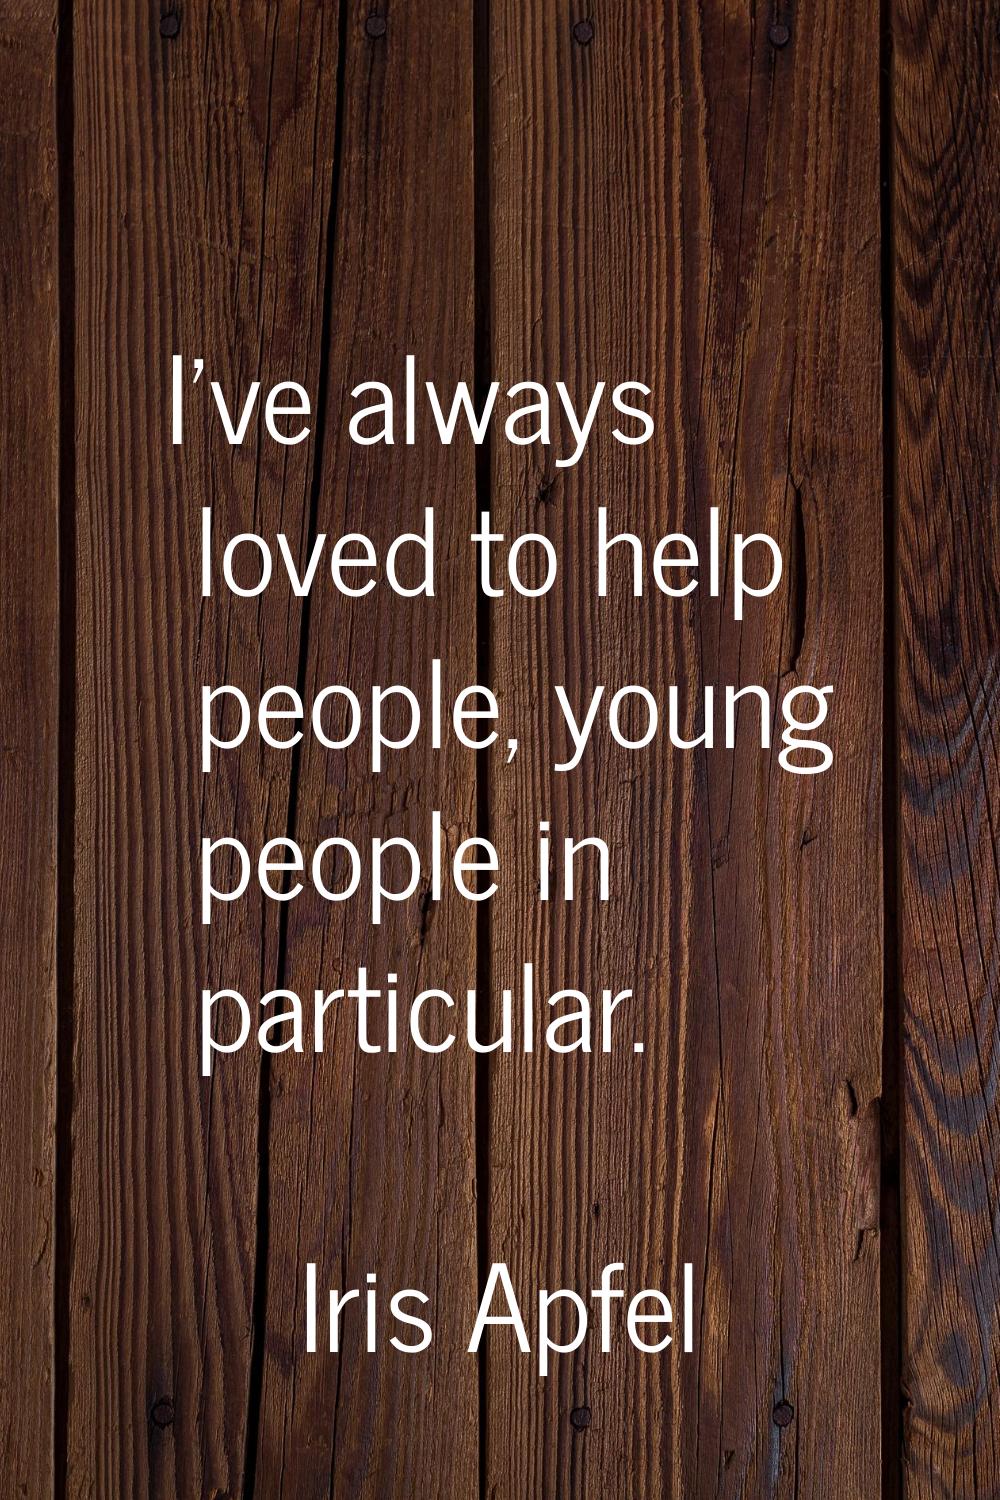 I've always loved to help people, young people in particular.